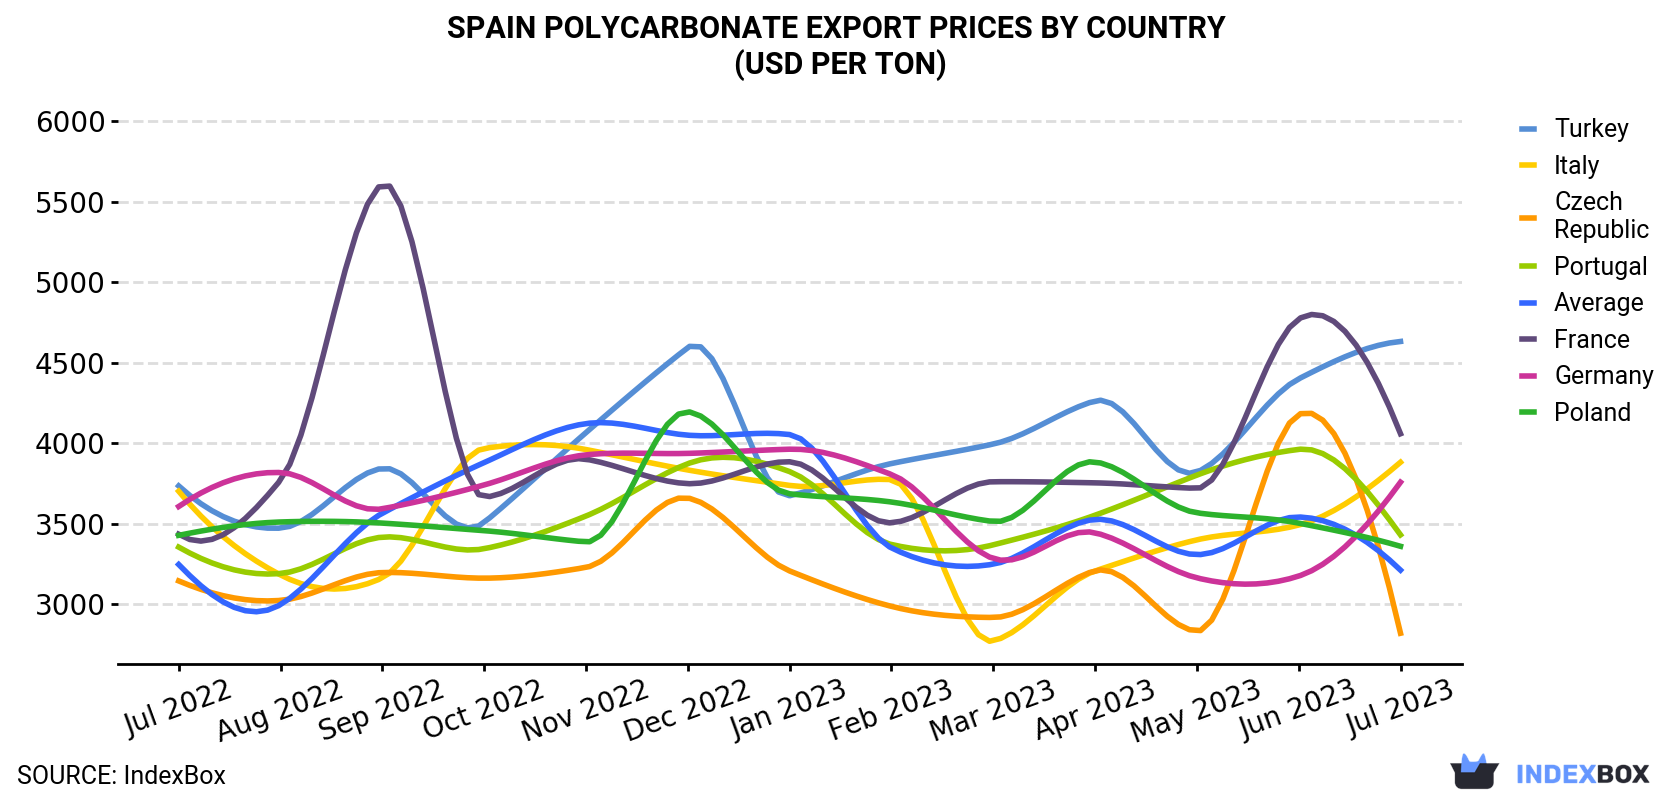 Spain Polycarbonate Export Prices By Country (USD Per Ton)